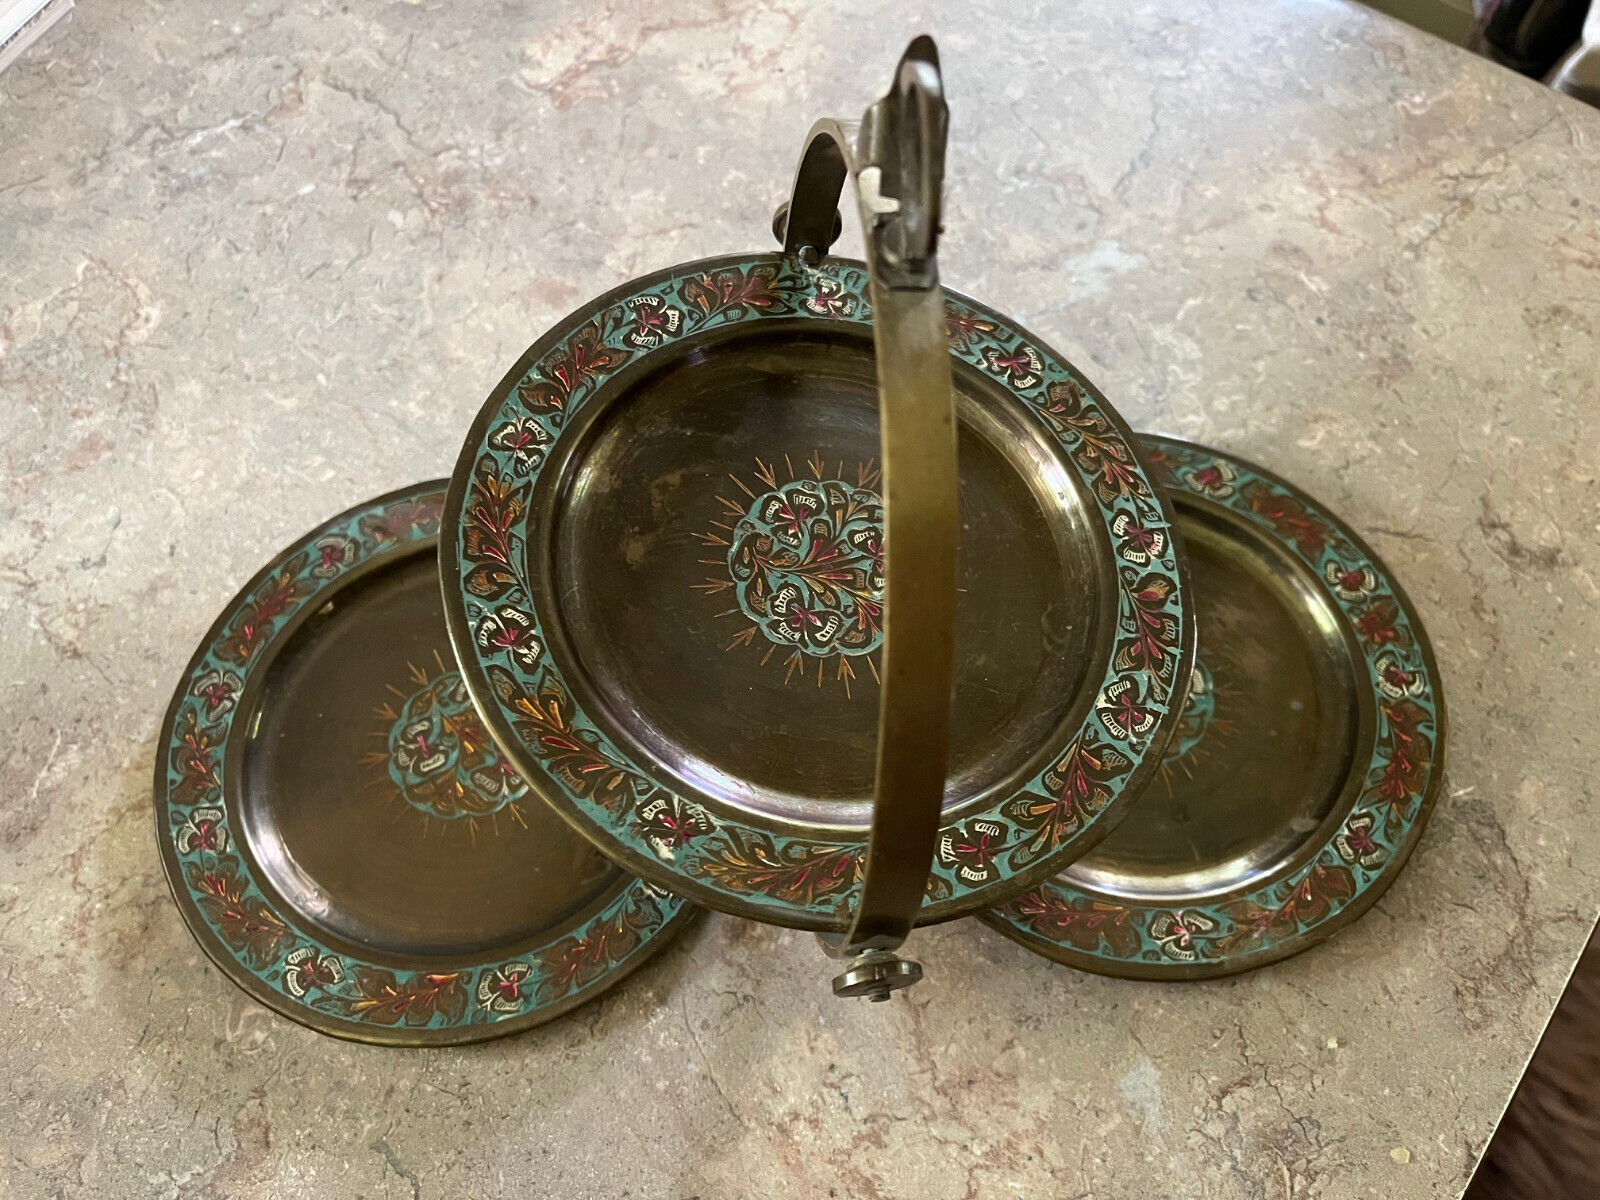 Vintage INDIA 3 tier collapsible serving tray - Enamel, Brass 1940\'s